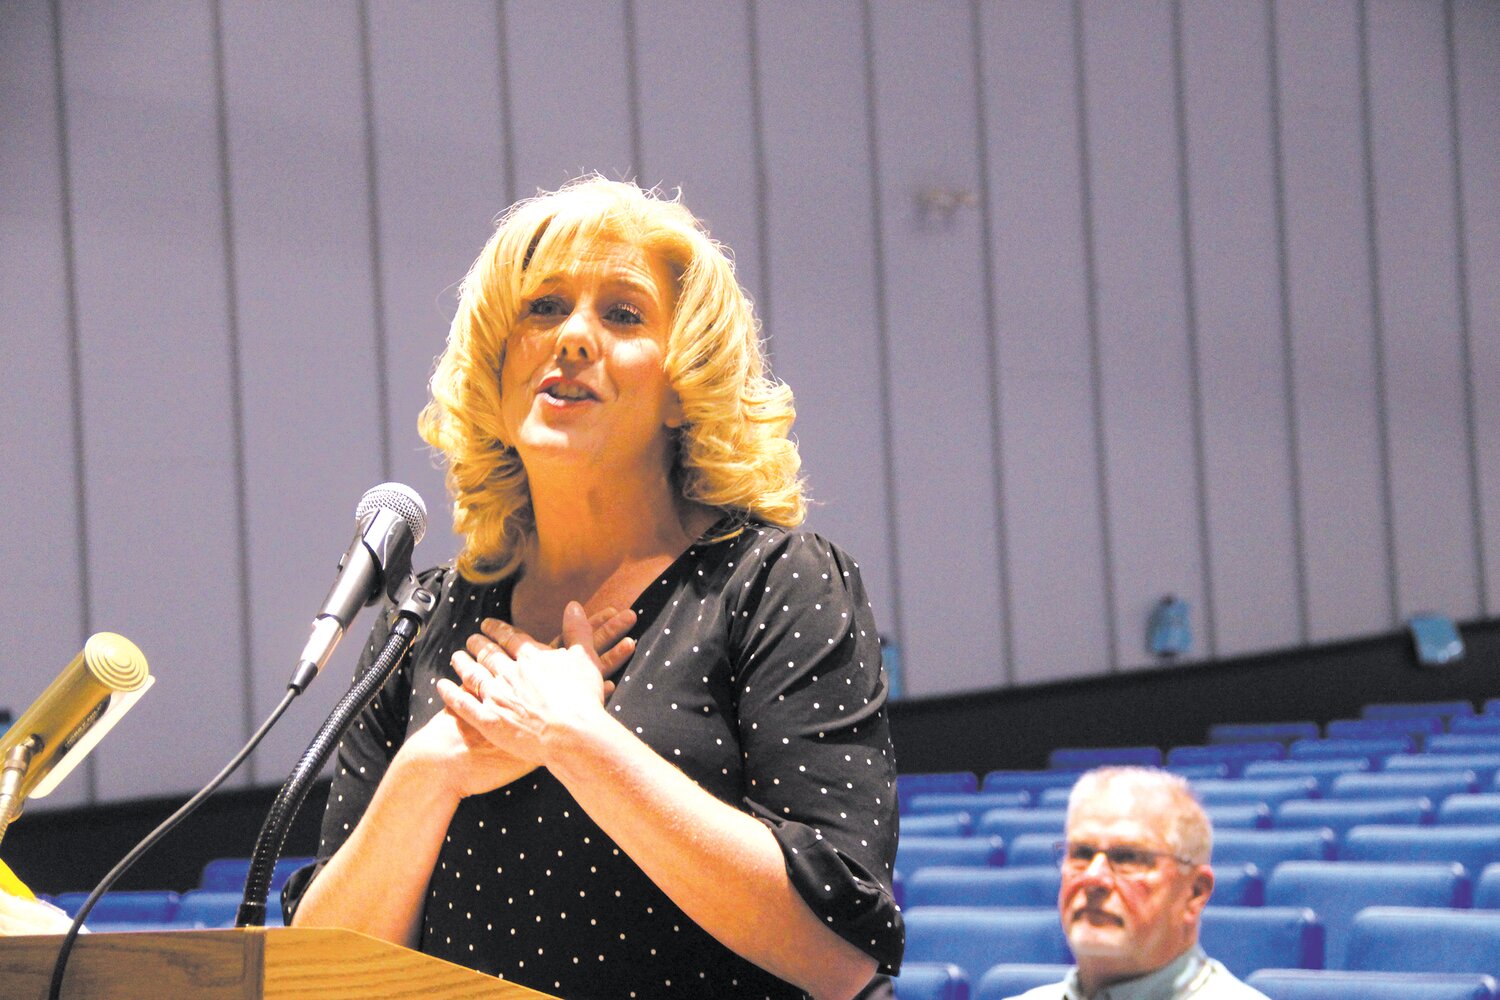 HER PASSION: Teacher of the year, Milissa O’Neil spoke of her passion for teaching in accepting her recognition at Tuesday’s School Committee Meeting. (Warwick Beacon photo)